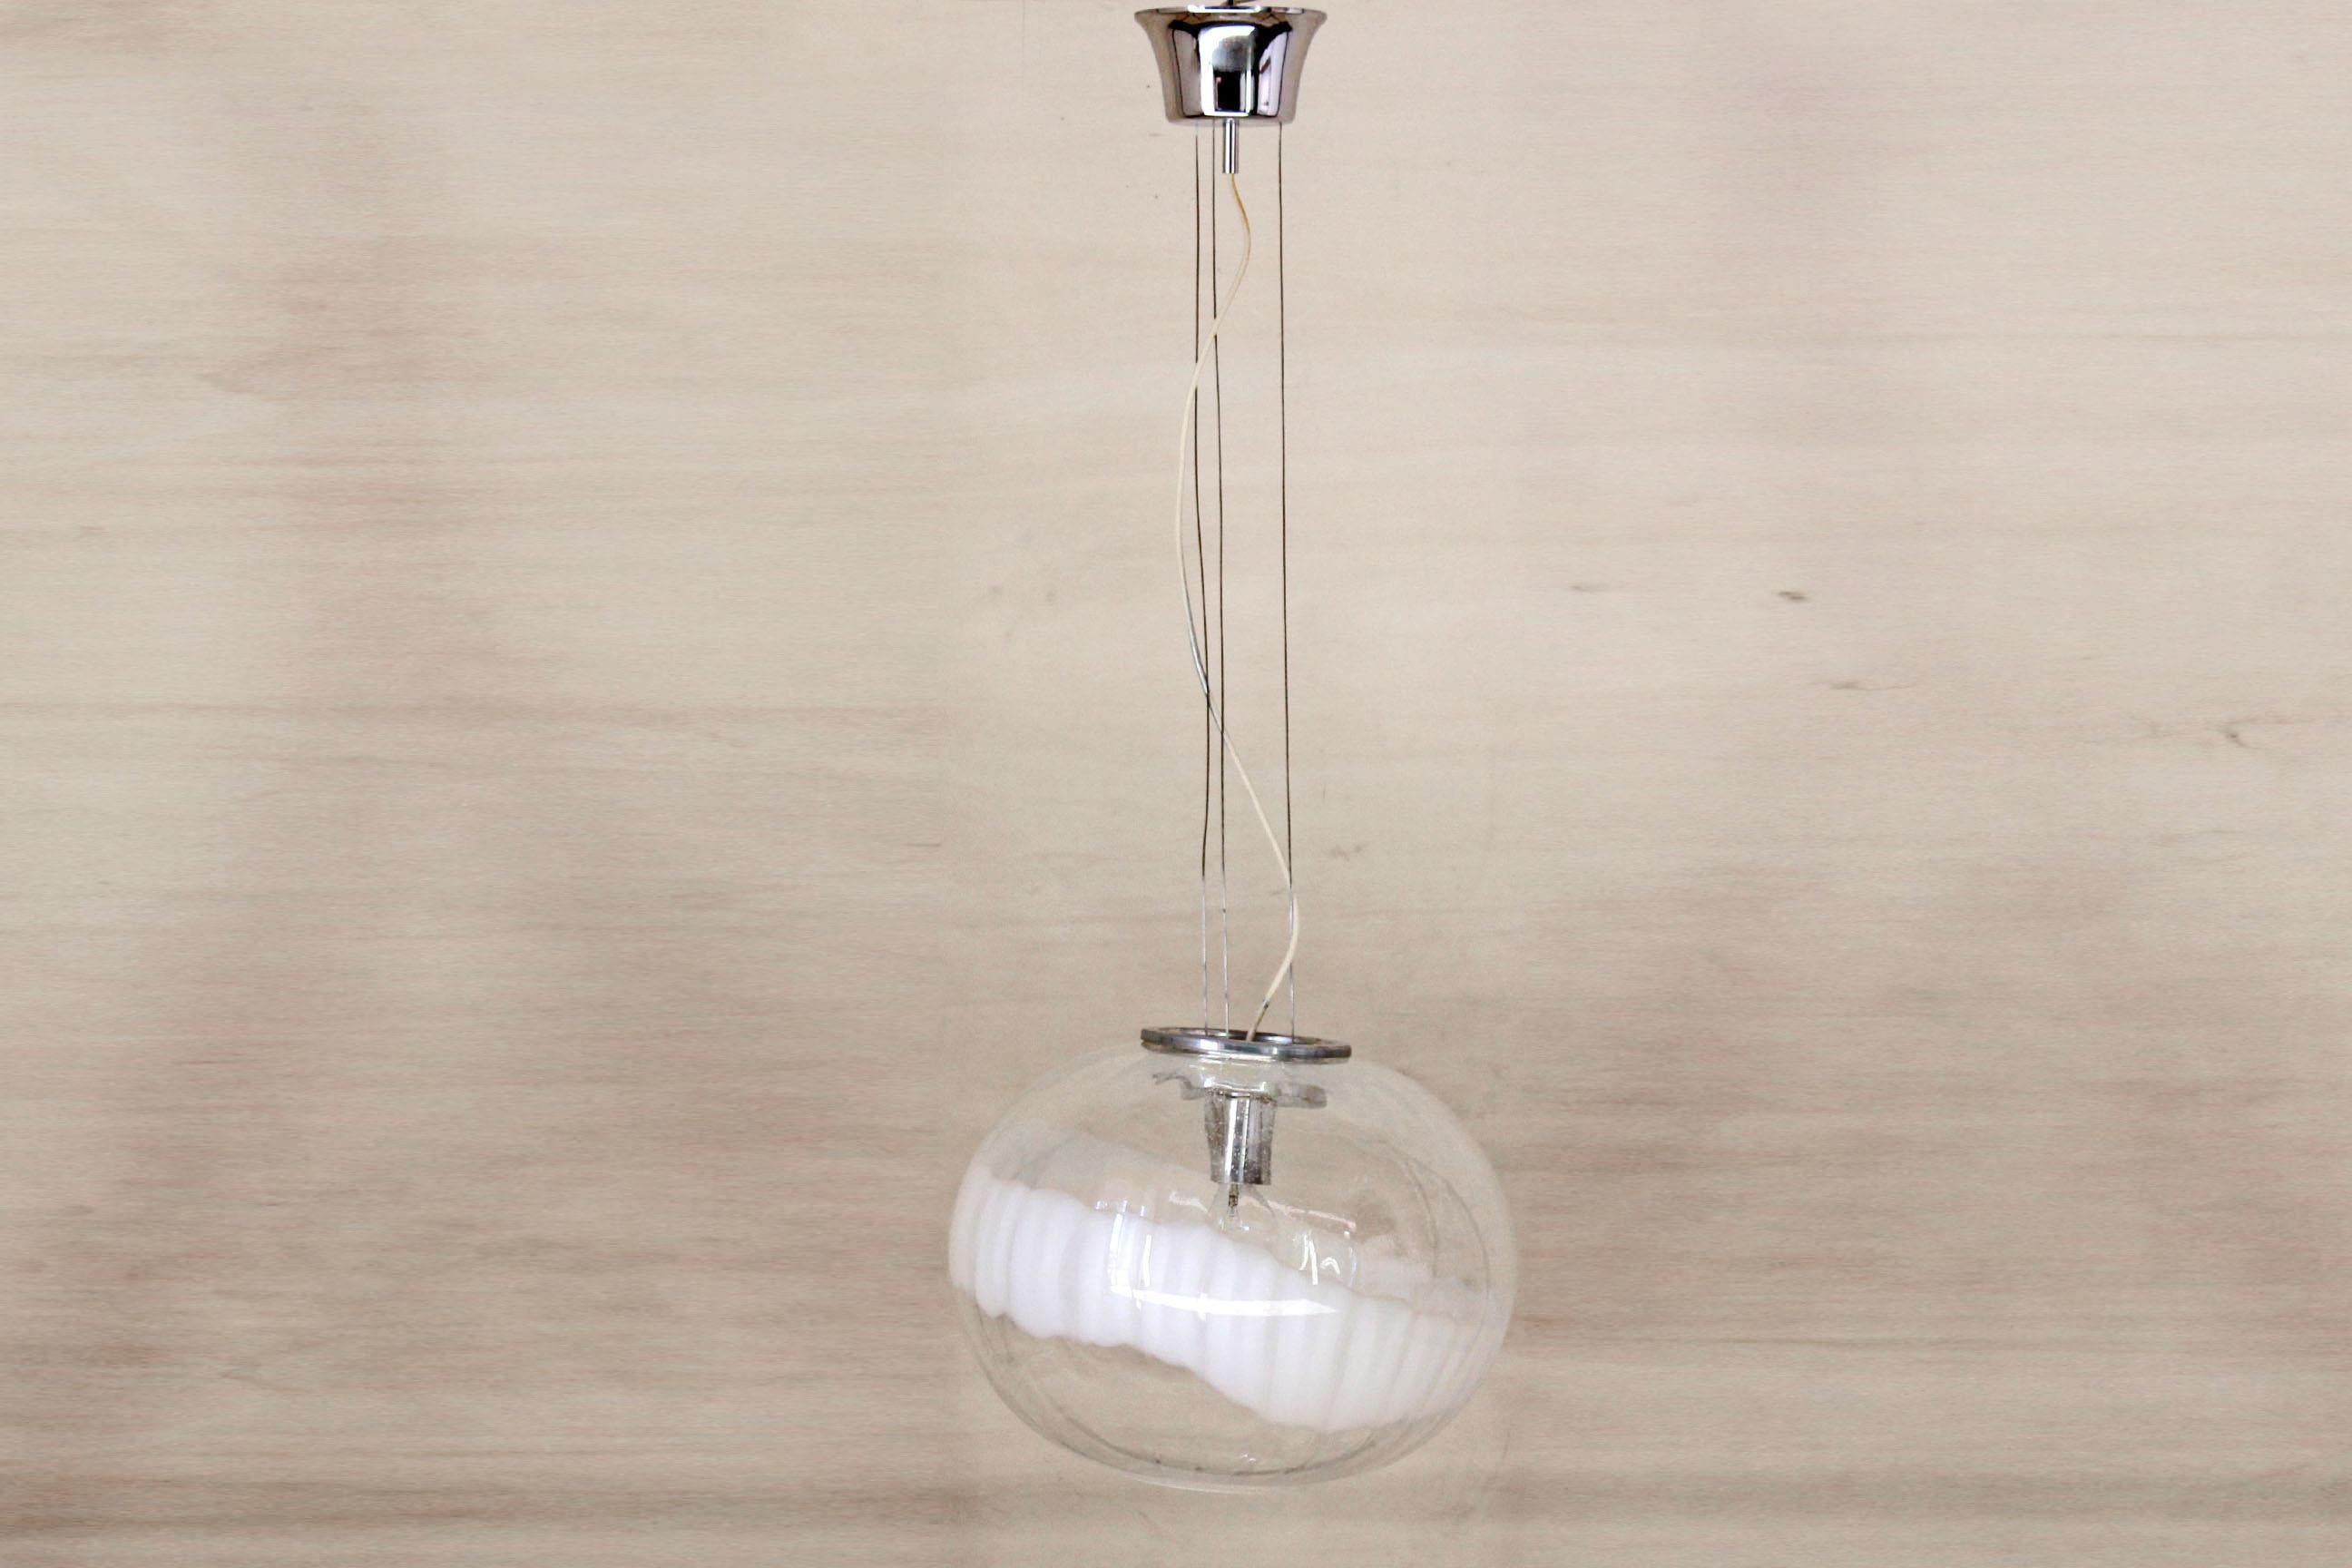 Murano ceiling light from the 1970s. Bicolor (white, transparent) artisanally blown glass, the electric parts have been recabled. Perfectly functioning. Measures: Murano globe height 35.